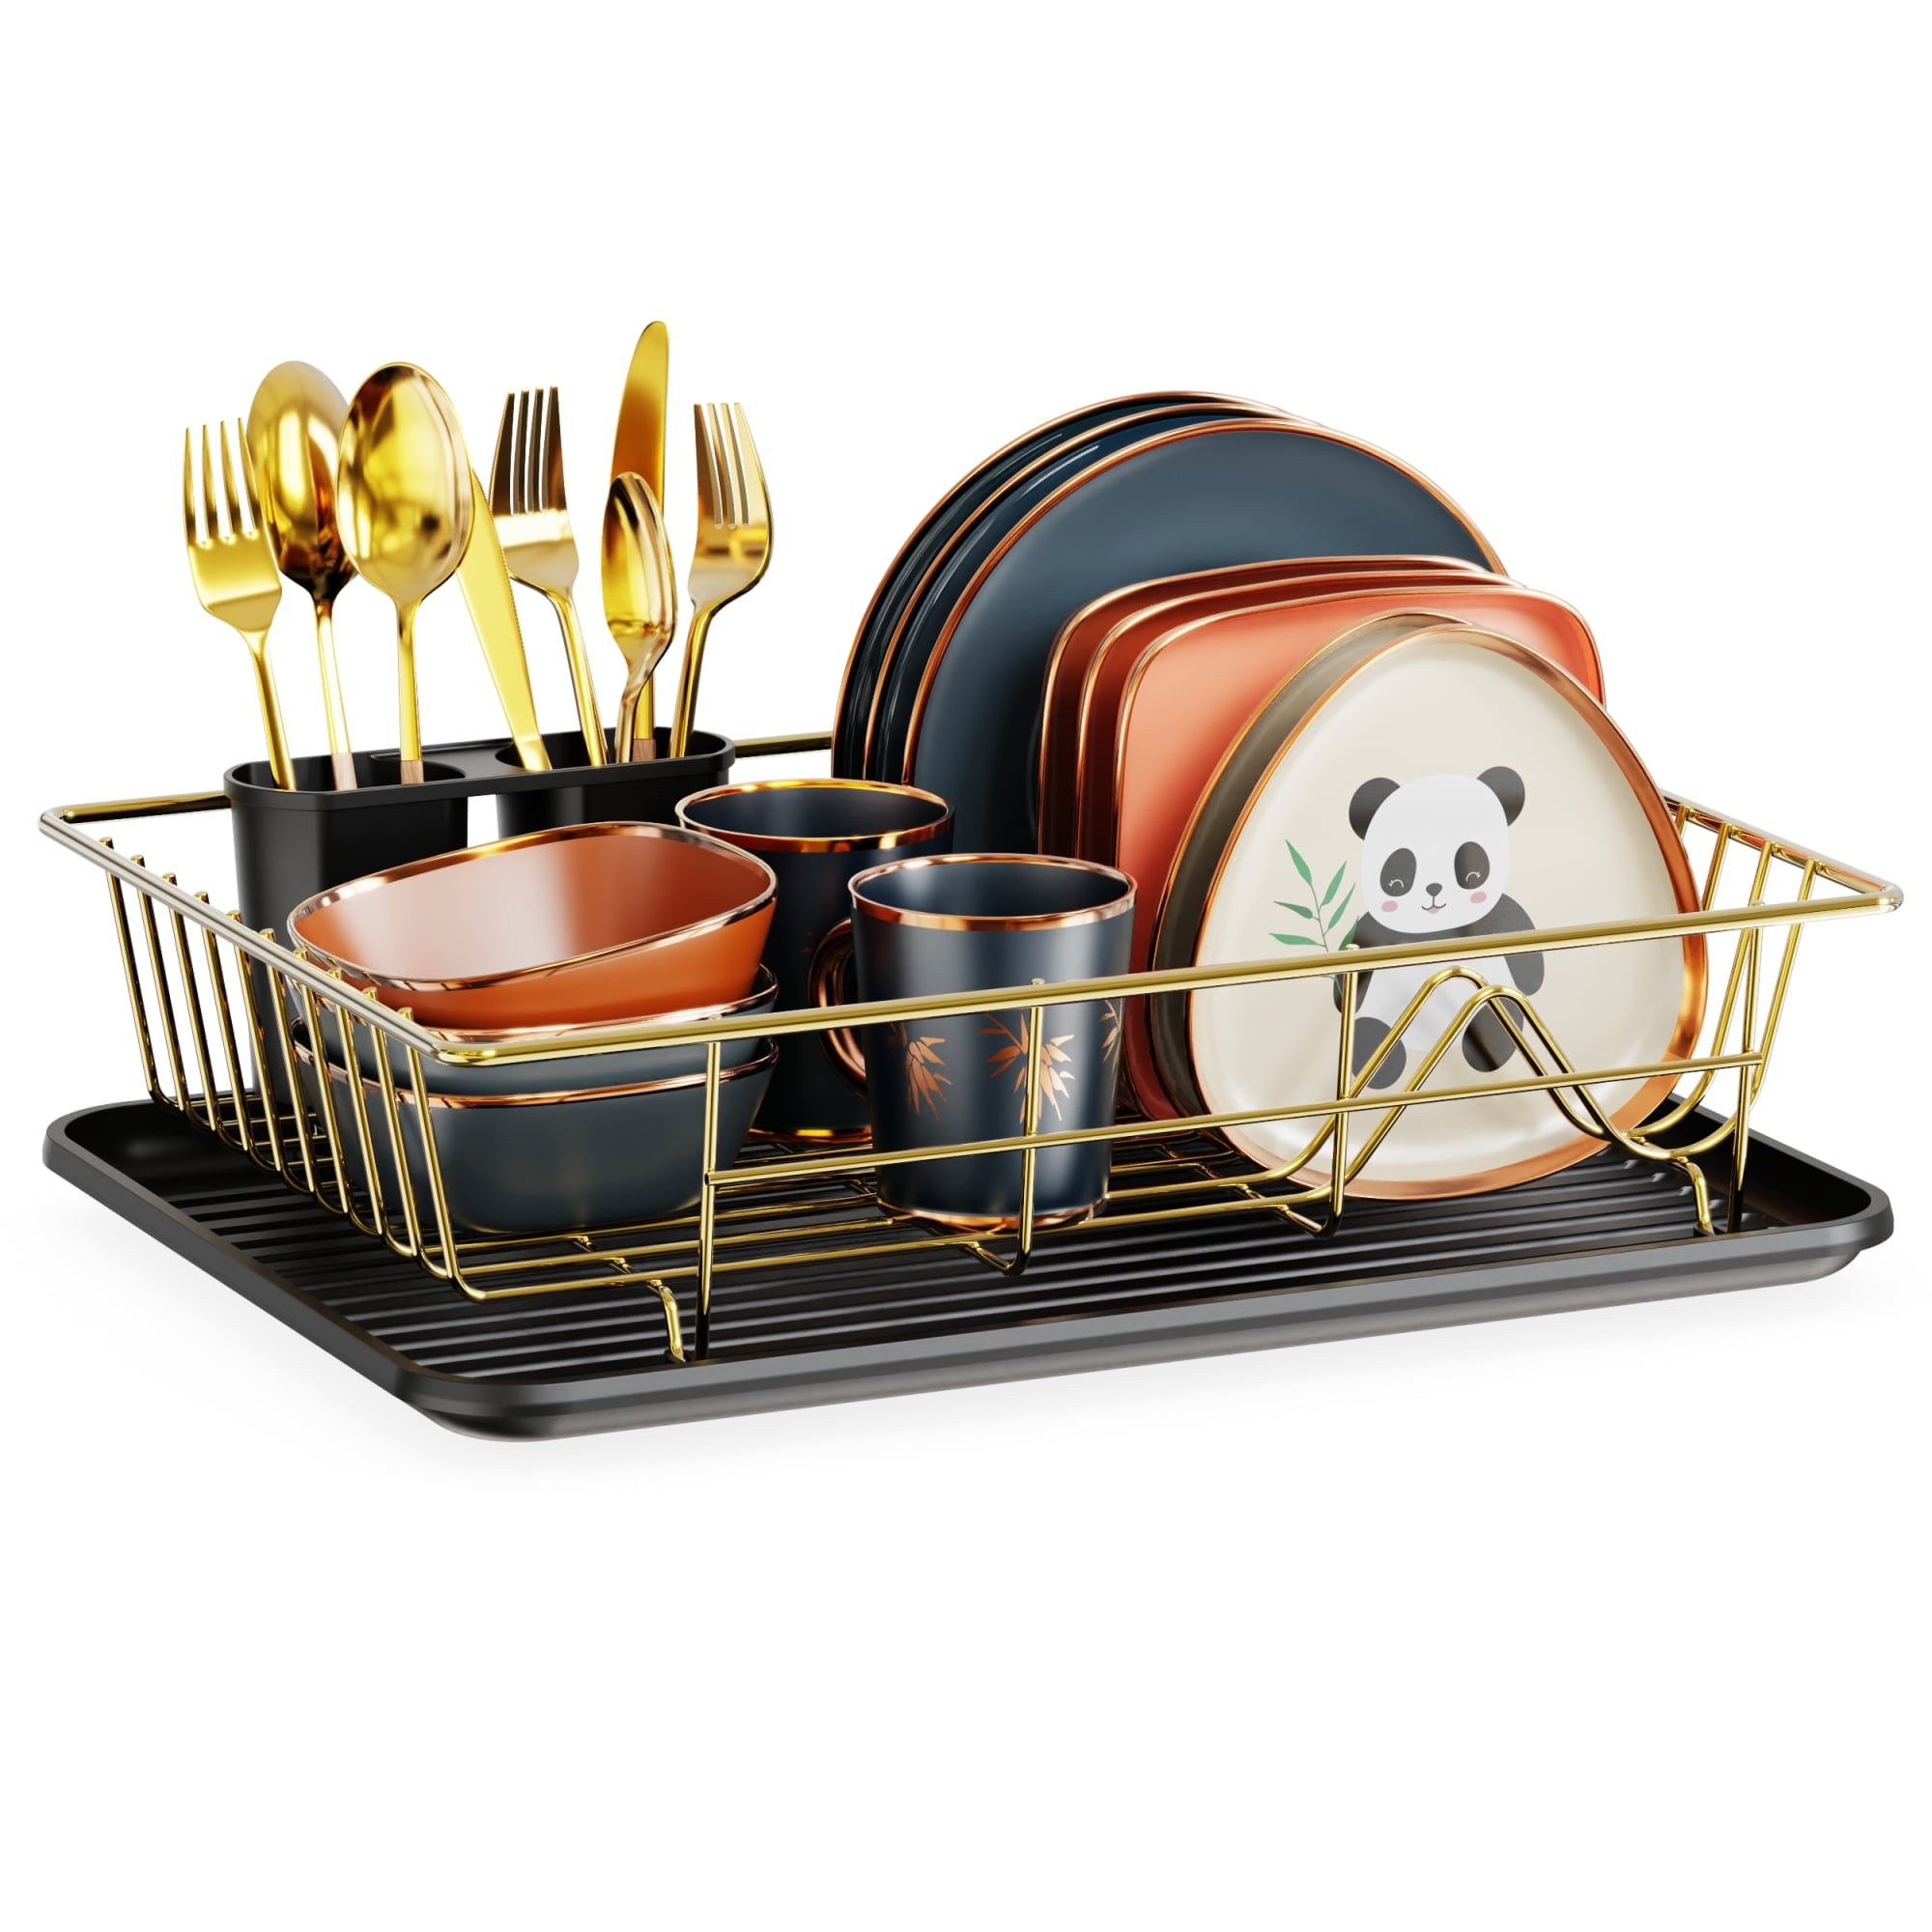 https://ak1.ostkcdn.com/images/products/is/images/direct/b31cab46513a93b24a0fd65512ad4f7decab494c/Dish-Drying-Rack%2CDish-Drainer-with-Tray-Utensil-Black-Golden.jpg